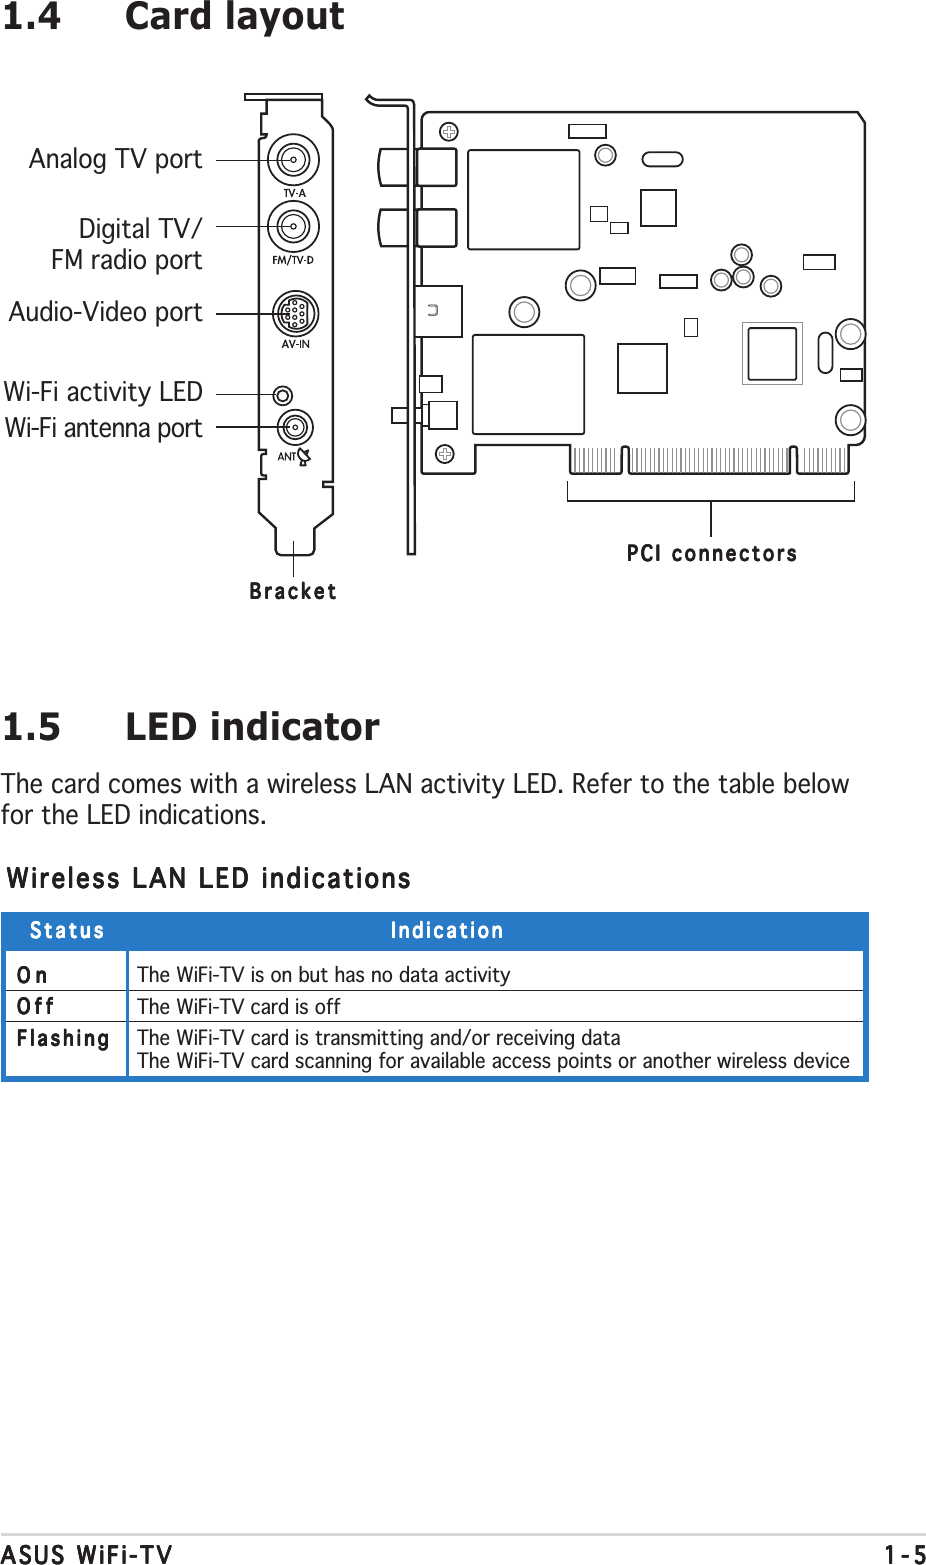 ASUS WiFi-TVASUS WiFi-TVASUS WiFi-TVASUS WiFi-TVASUS WiFi-TV 1-51-51-51-51-51.4 Card layout1.5 LED indicatorThe card comes with a wireless LAN activity LED. Refer to the table belowfor the LED indications.StatusStatusStatusStatusStatus IndicationIndicationIndicationIndicationIndicationOnOnOnOnO n The WiFi-TV is on but has no data activityOffOffOffOffO f f The WiFi-TV card is offFlashingFlashingFlashingFlashingFlashing The WiFi-TV card is transmitting and/or receiving dataThe WiFi-TV card scanning for available access points or another wireless deviceWireless LAN LED indicationsWireless LAN LED indicationsWireless LAN LED indicationsWireless LAN LED indicationsWireless LAN LED indicationsPCI connectorsPCI connectorsPCI connectorsPCI connectorsPCI connectorsBracketBracketBracketBracketBracketDigital TV/FM radio portAudio-Video portWi-Fi activity LEDWi-Fi antenna portAnalog TV port